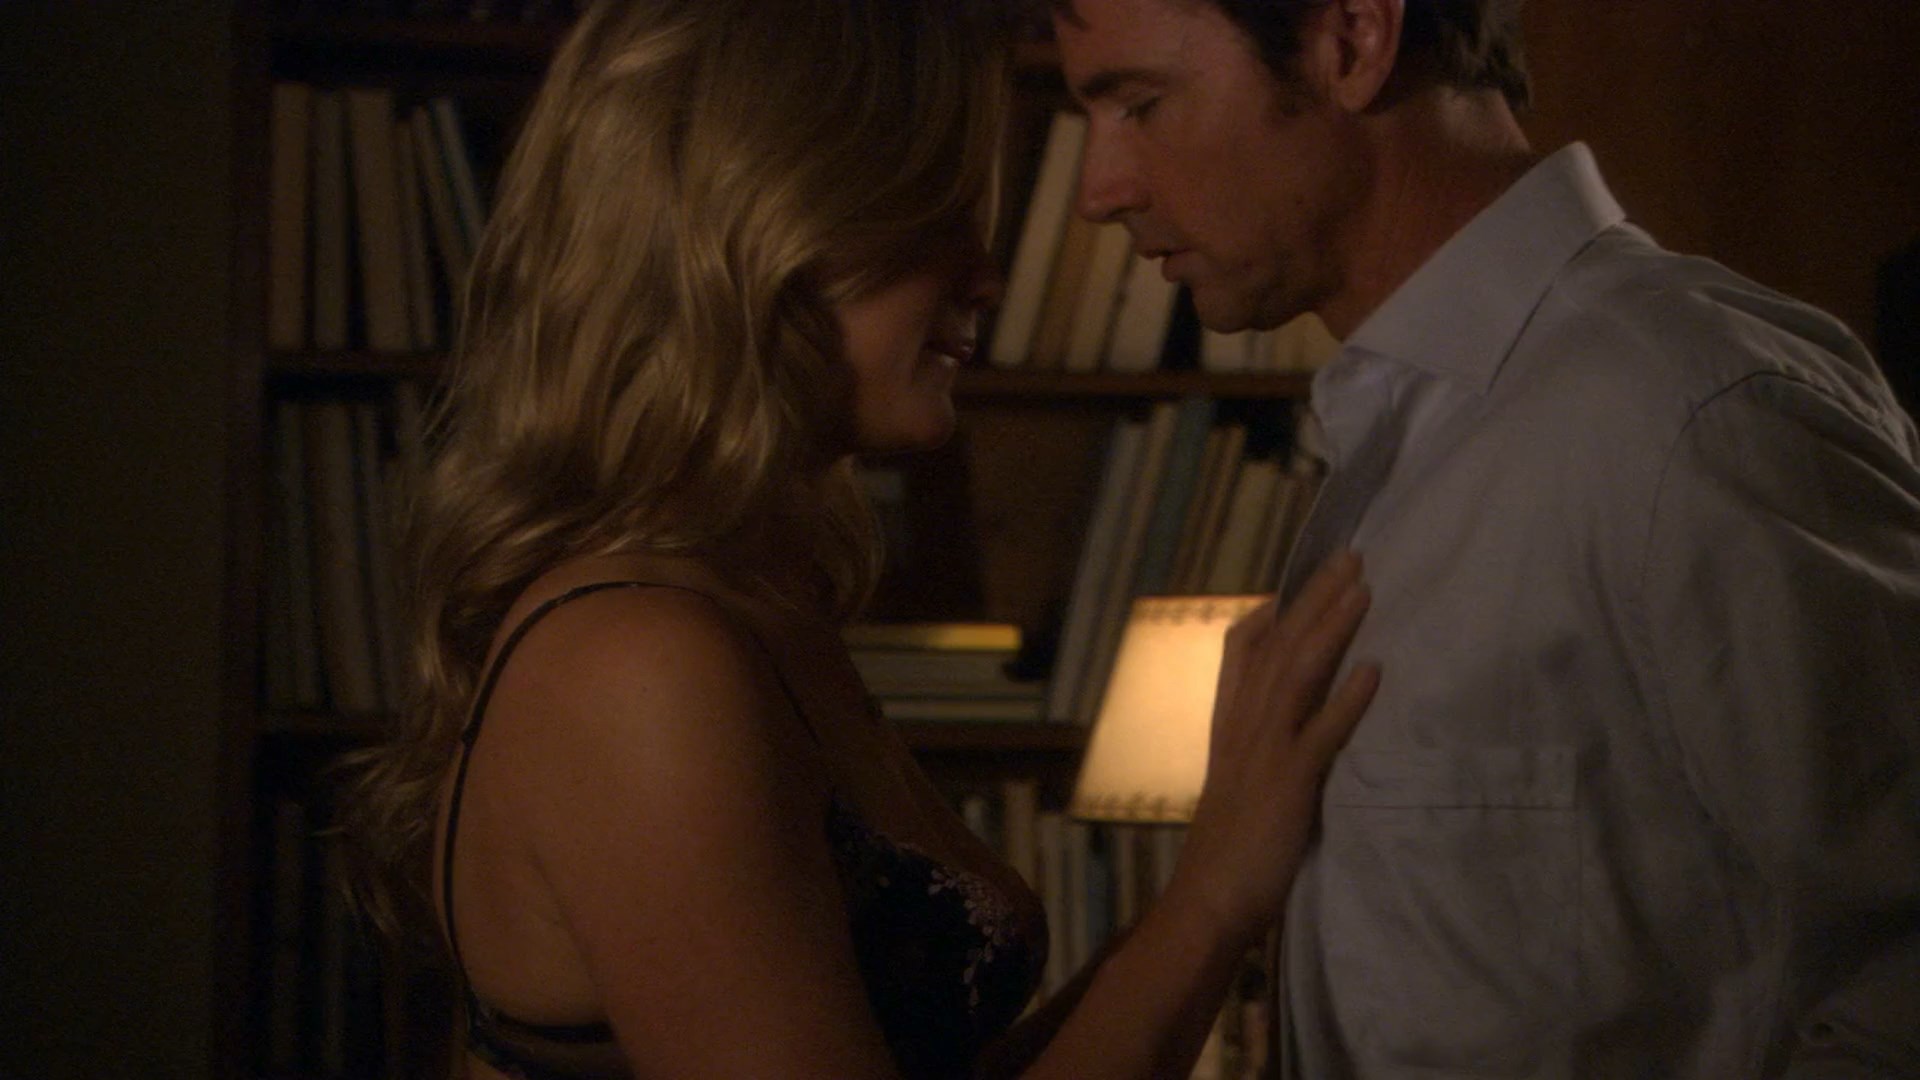 Sarah Lancaster shows amazing cleavage while makes out with some guy.